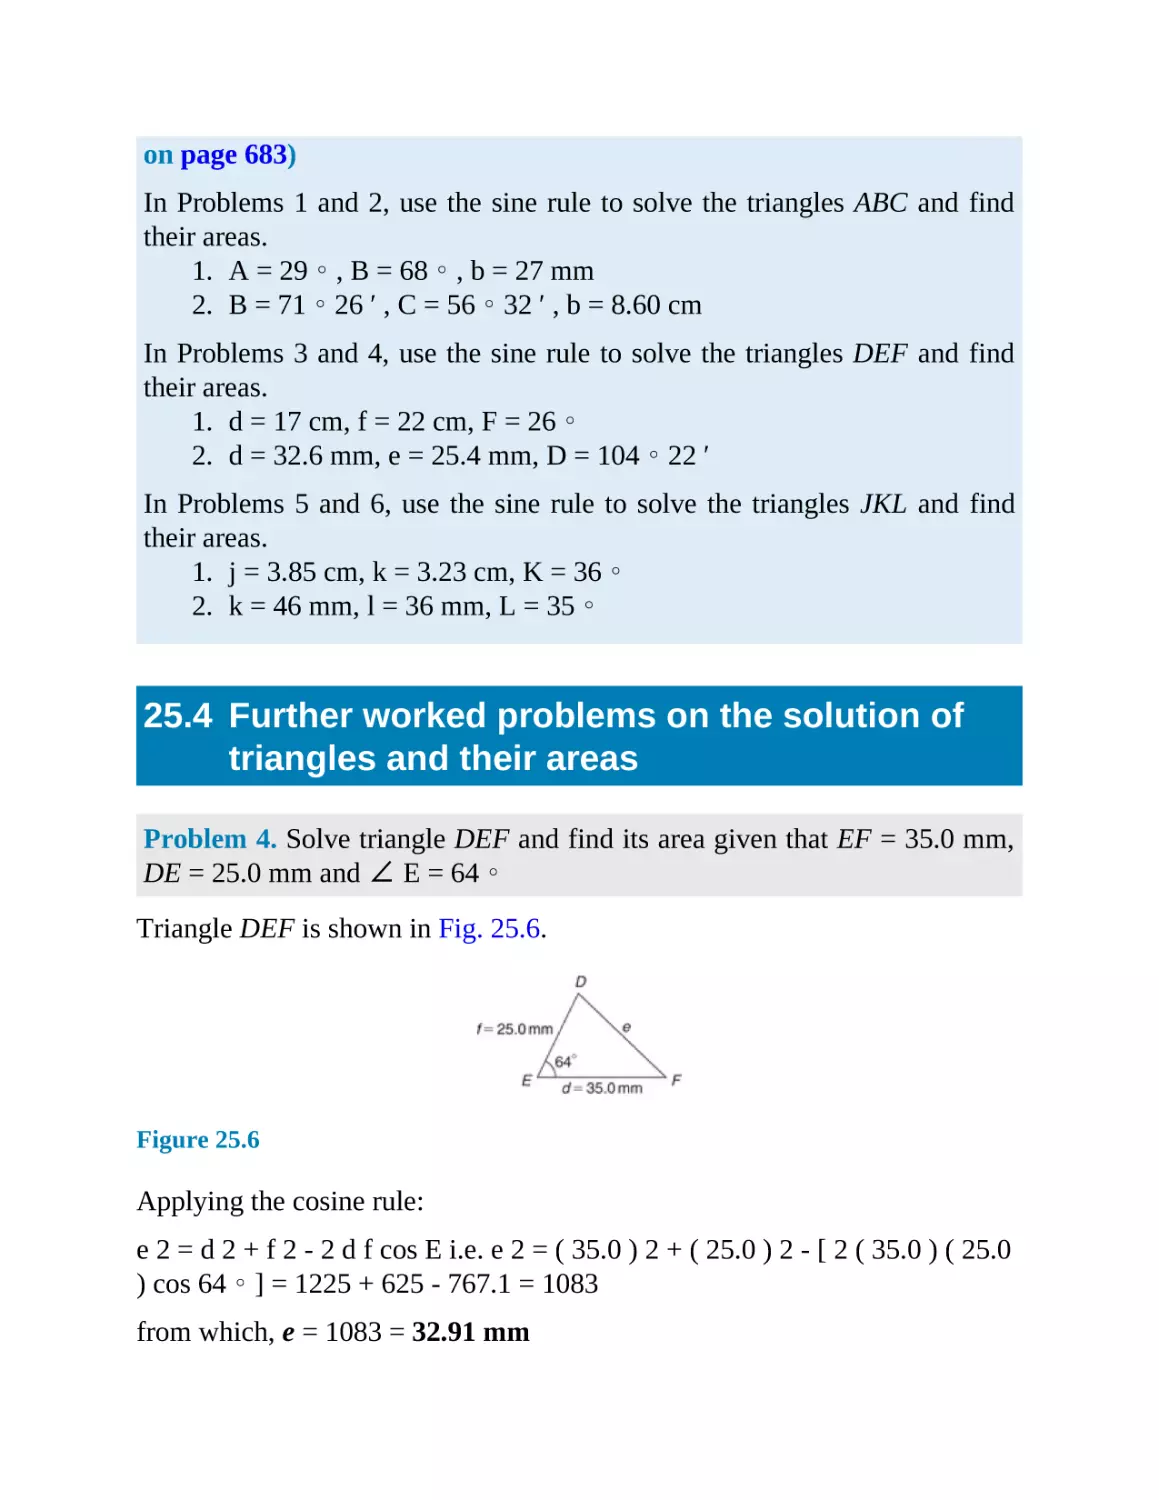 25.4 Further worked problems on the solution of triangles and their areas